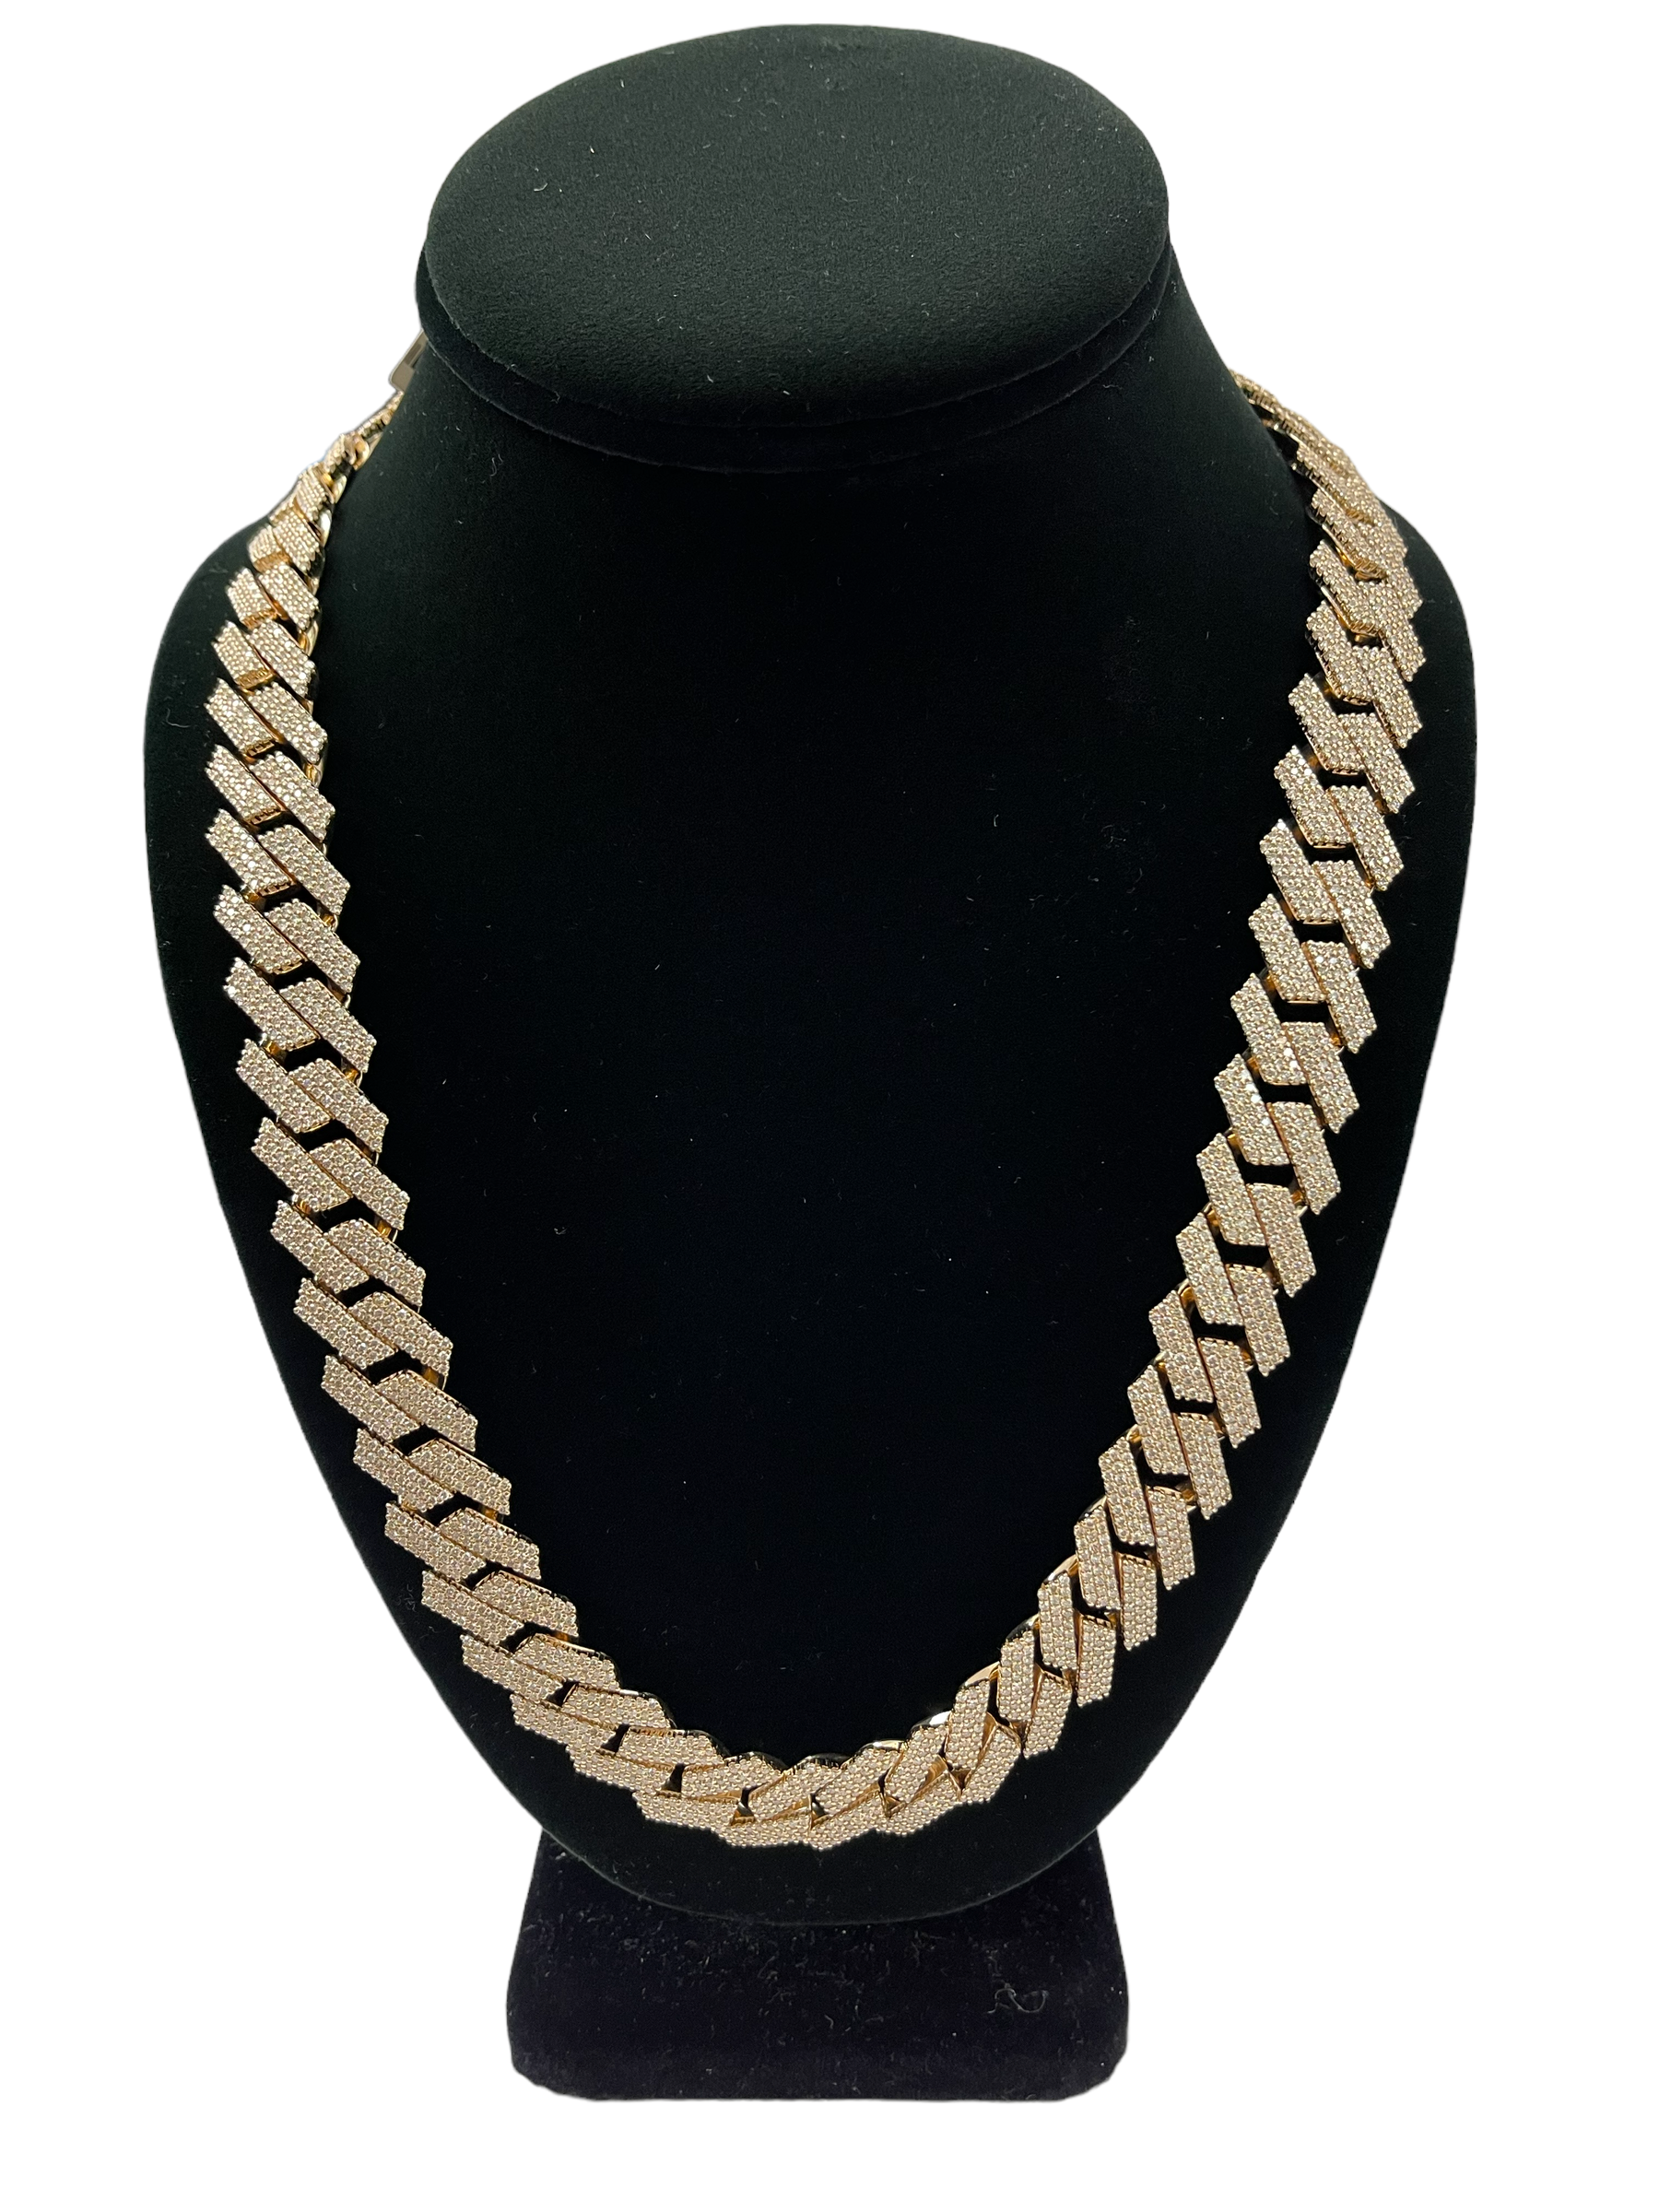 Cuban Link Diamond Necklace Chain 15mm Yellow Gold 14kt